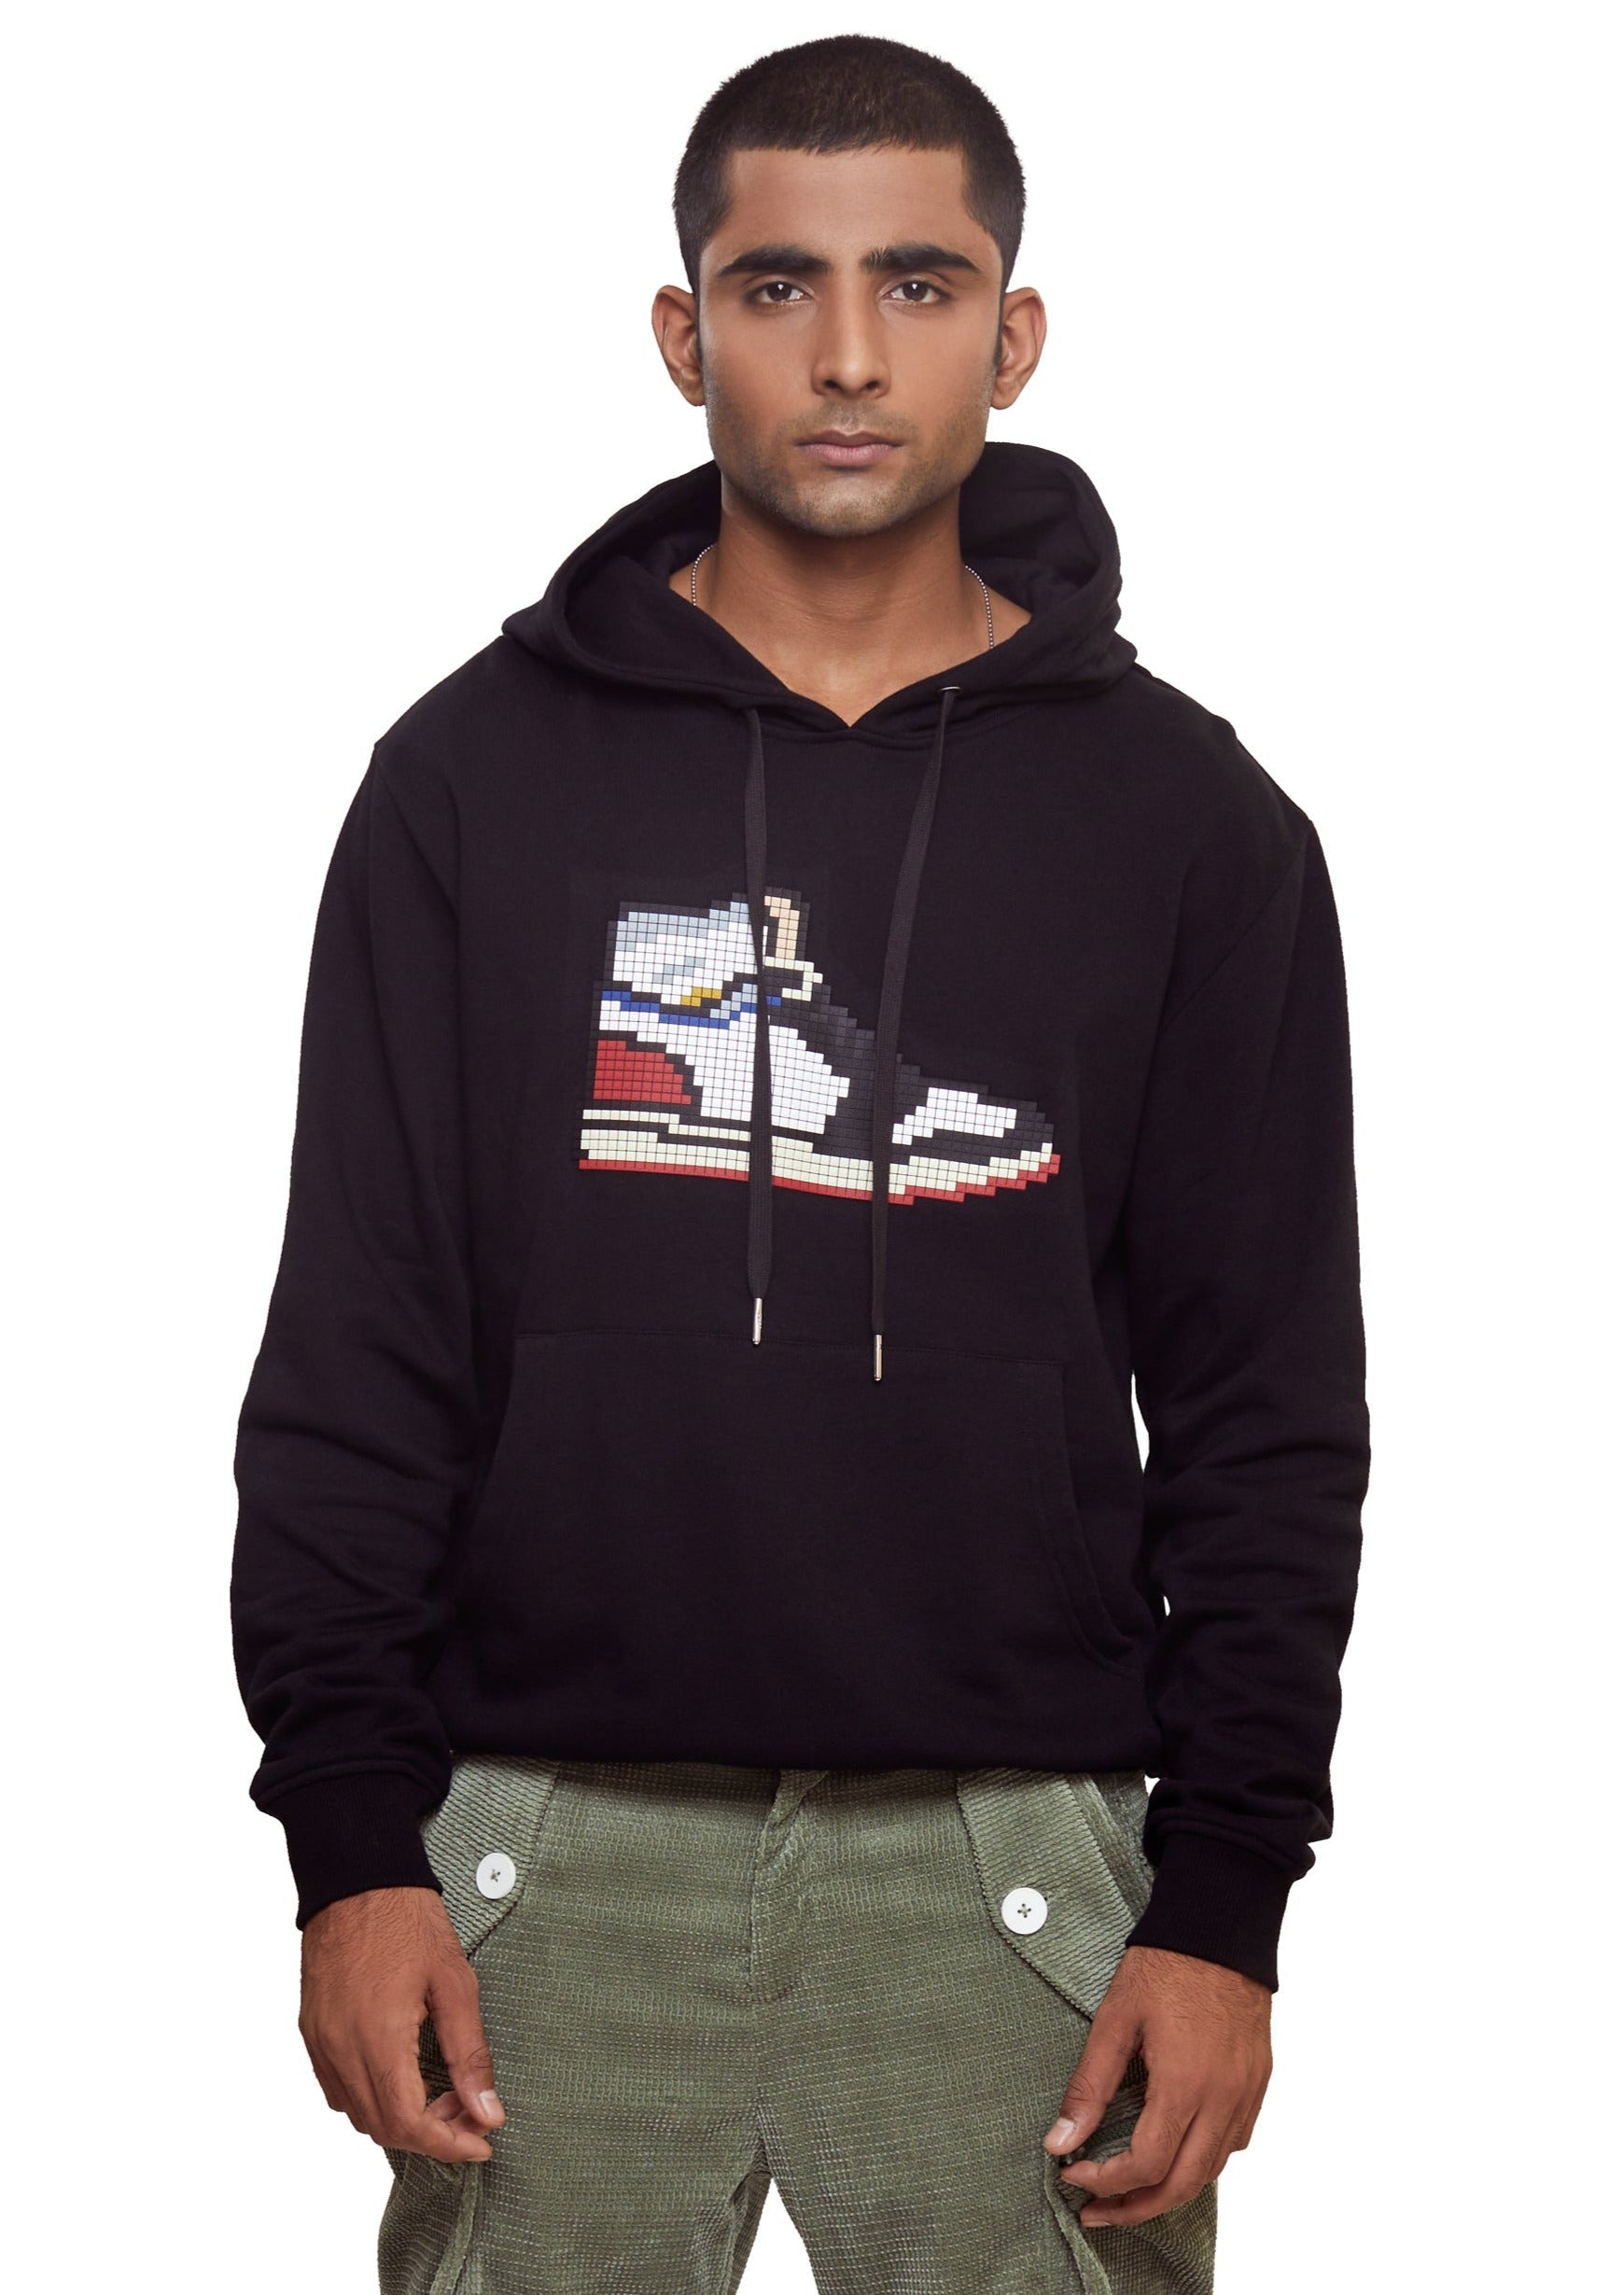 Black cotton graphic print drawstring hoodie with long sleeves and fitted-cuff sleeves from the brand 8-bit